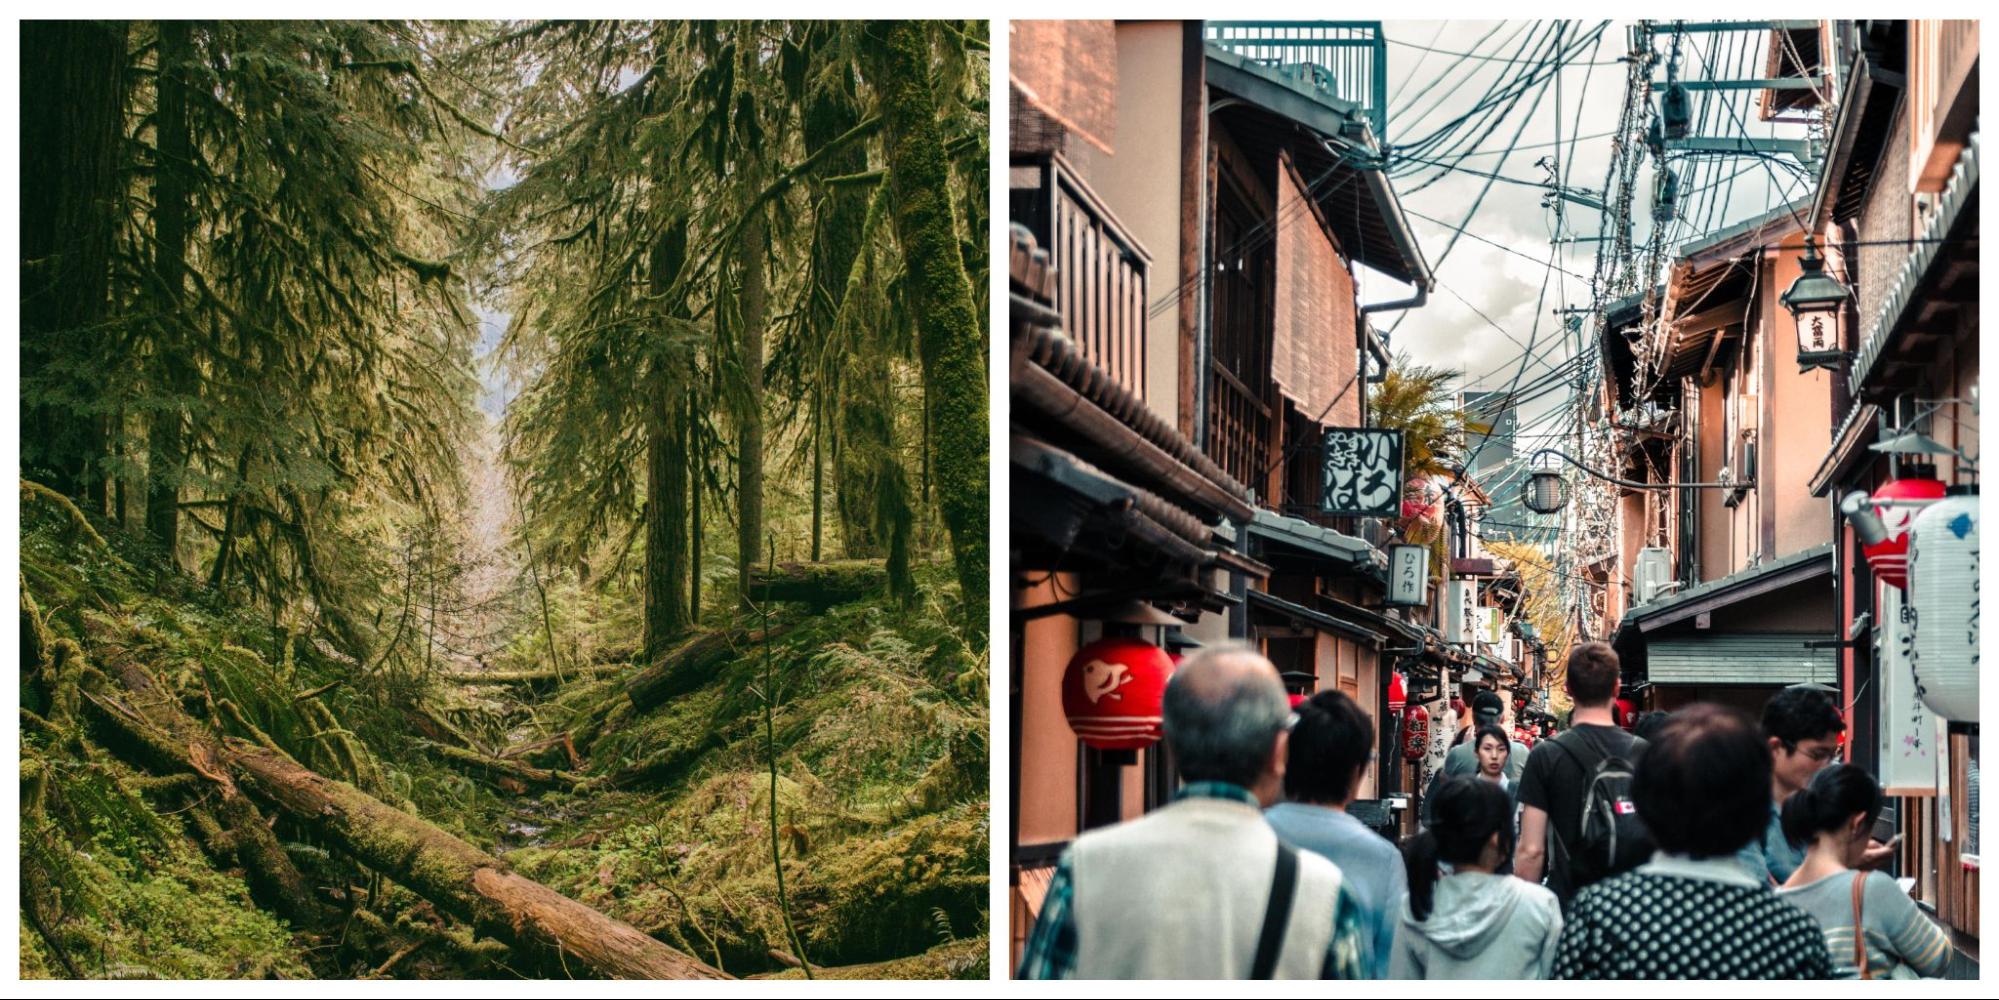 Side-by-side photos of a mossy forest and a crowded street.